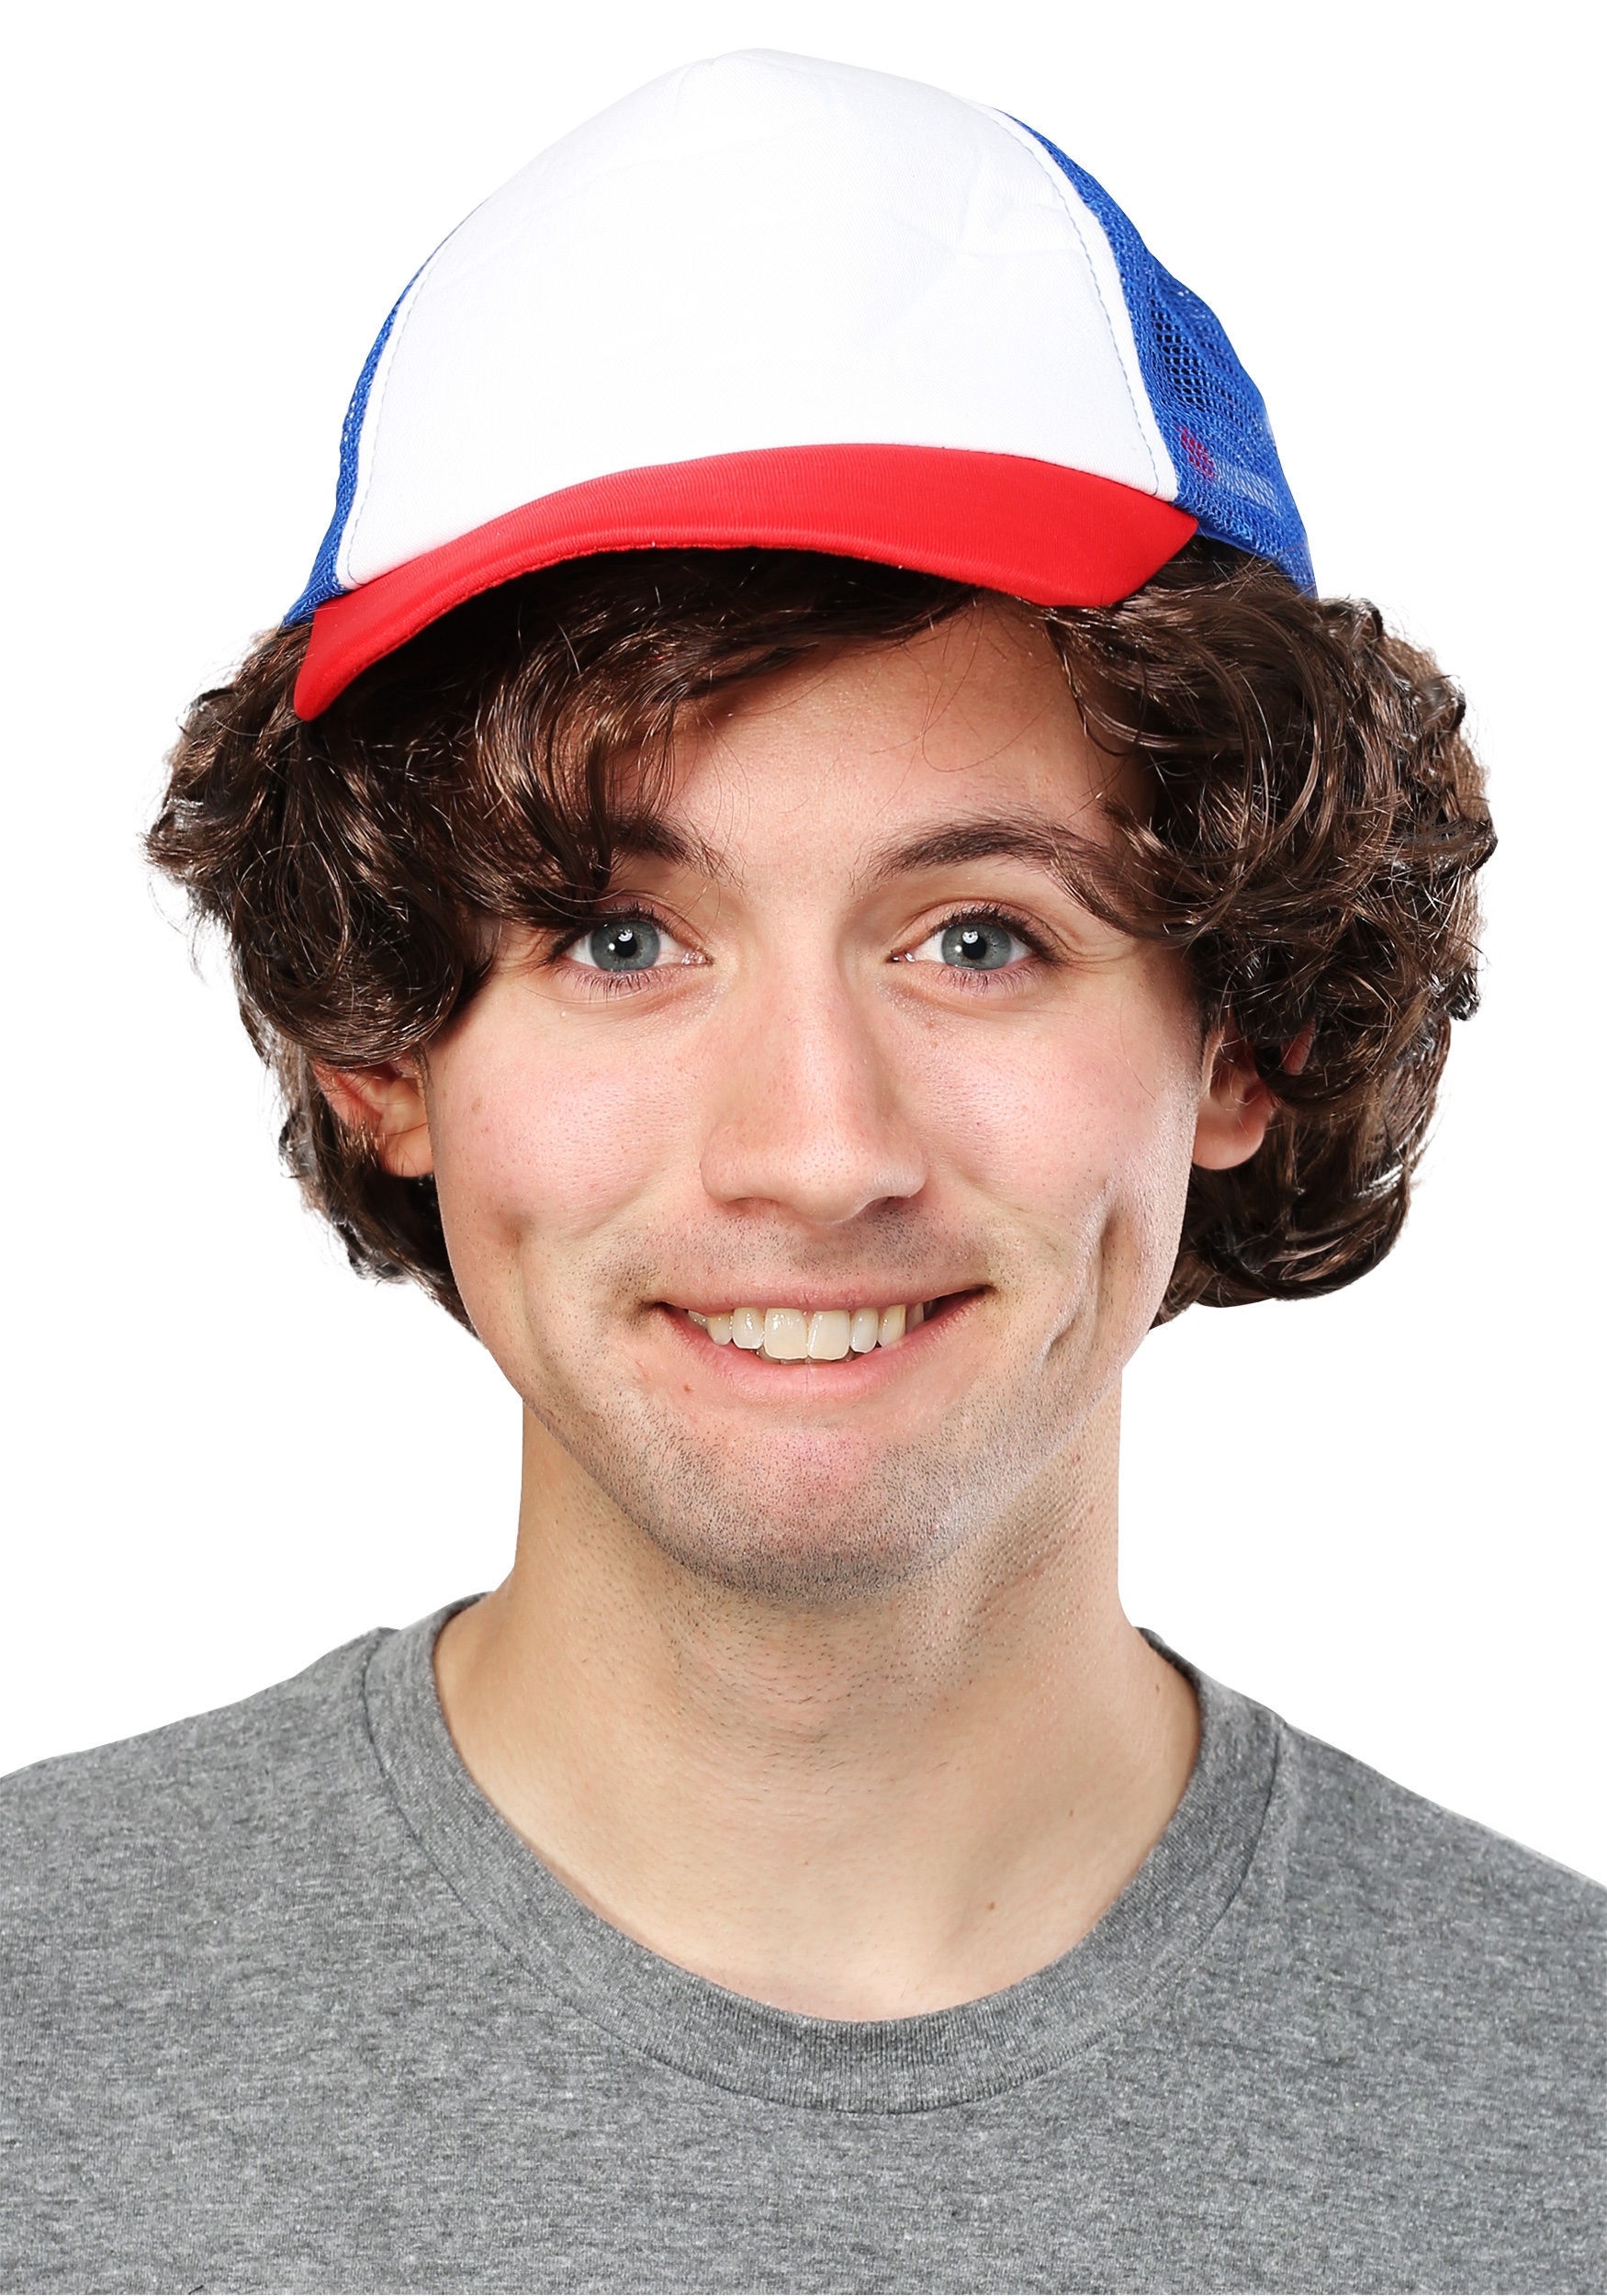 Photos - Fancy Dress A&D FUN Costumes Strange Stuff Wig and Baseball Hat for Adults Brown 